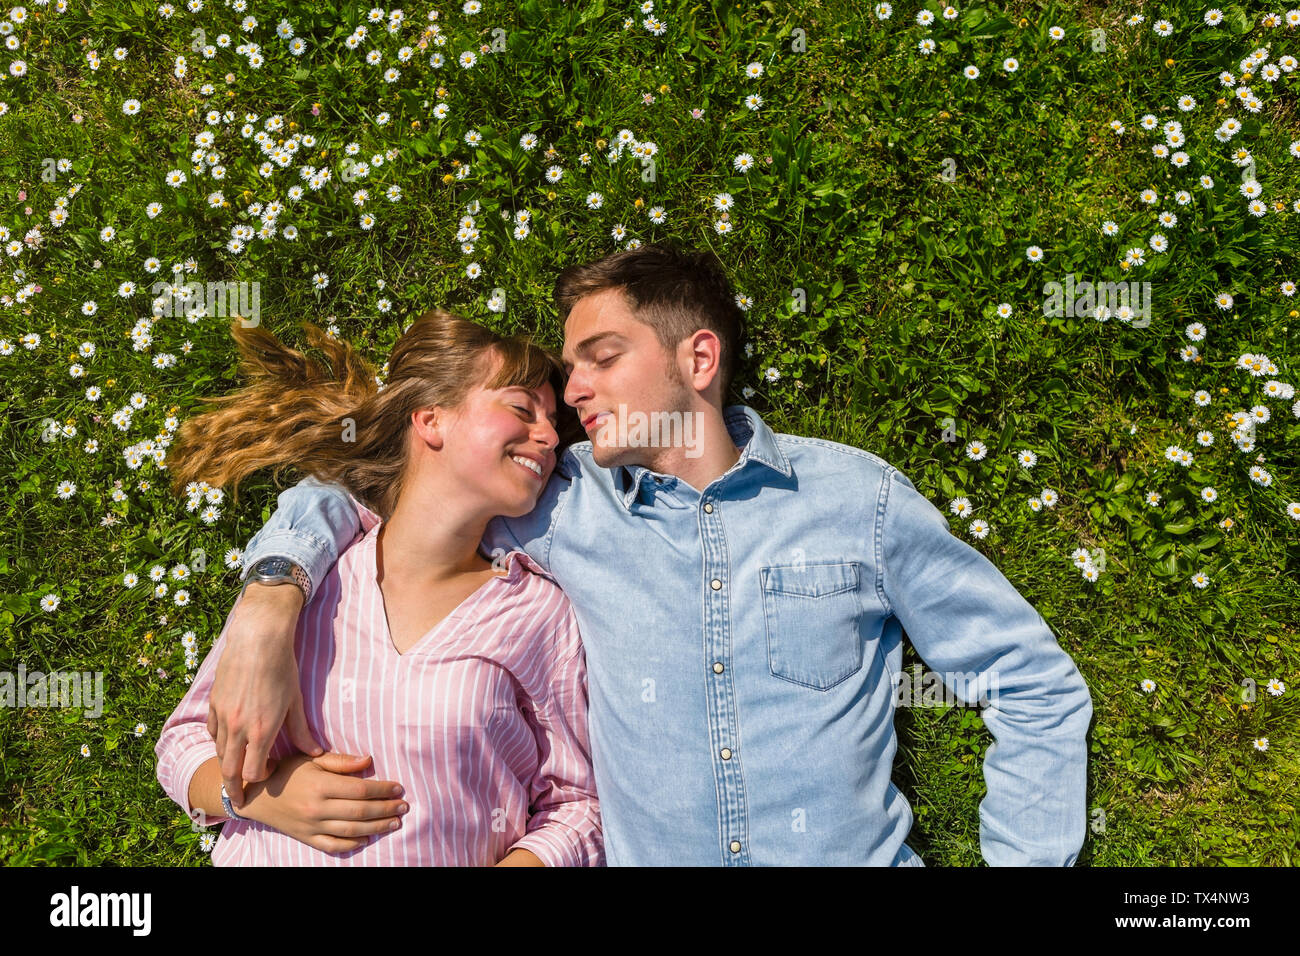 Happy young couple relaxing on grass in a park, overhead view Banque D'Images